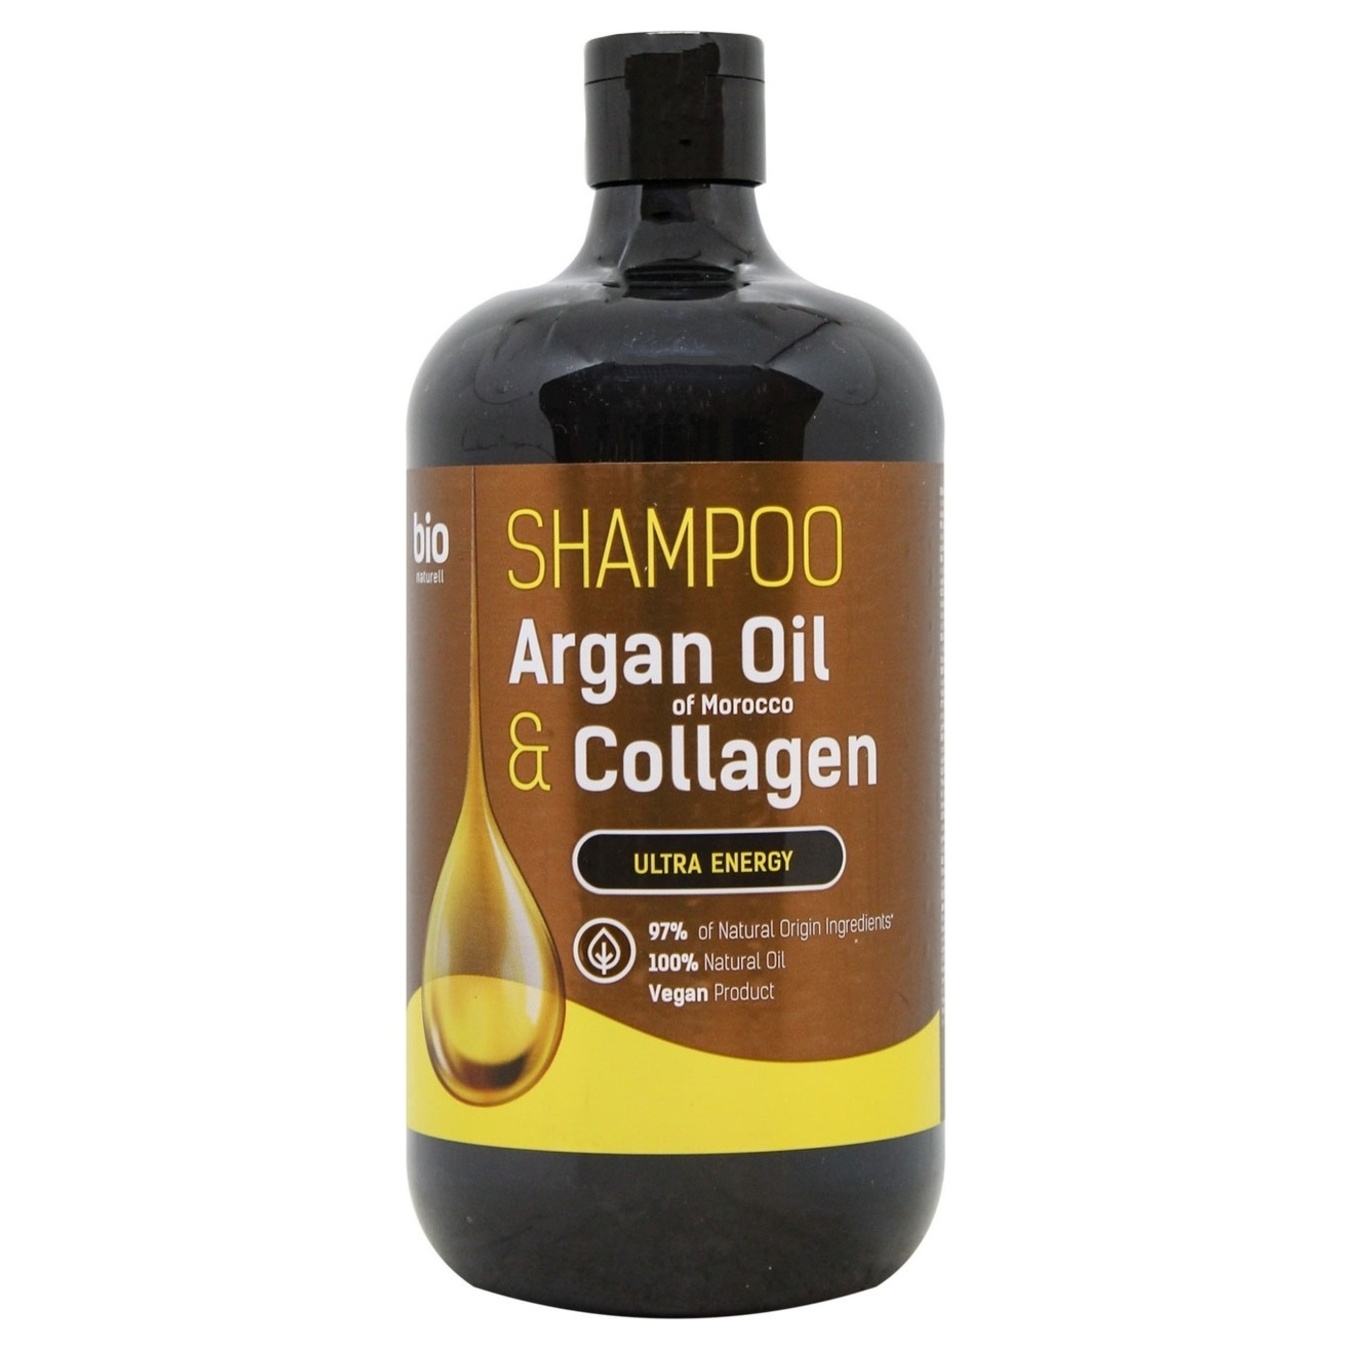 Bio Naturell shampoo for all hair types Moroccan argan oil and collagen 946 ml